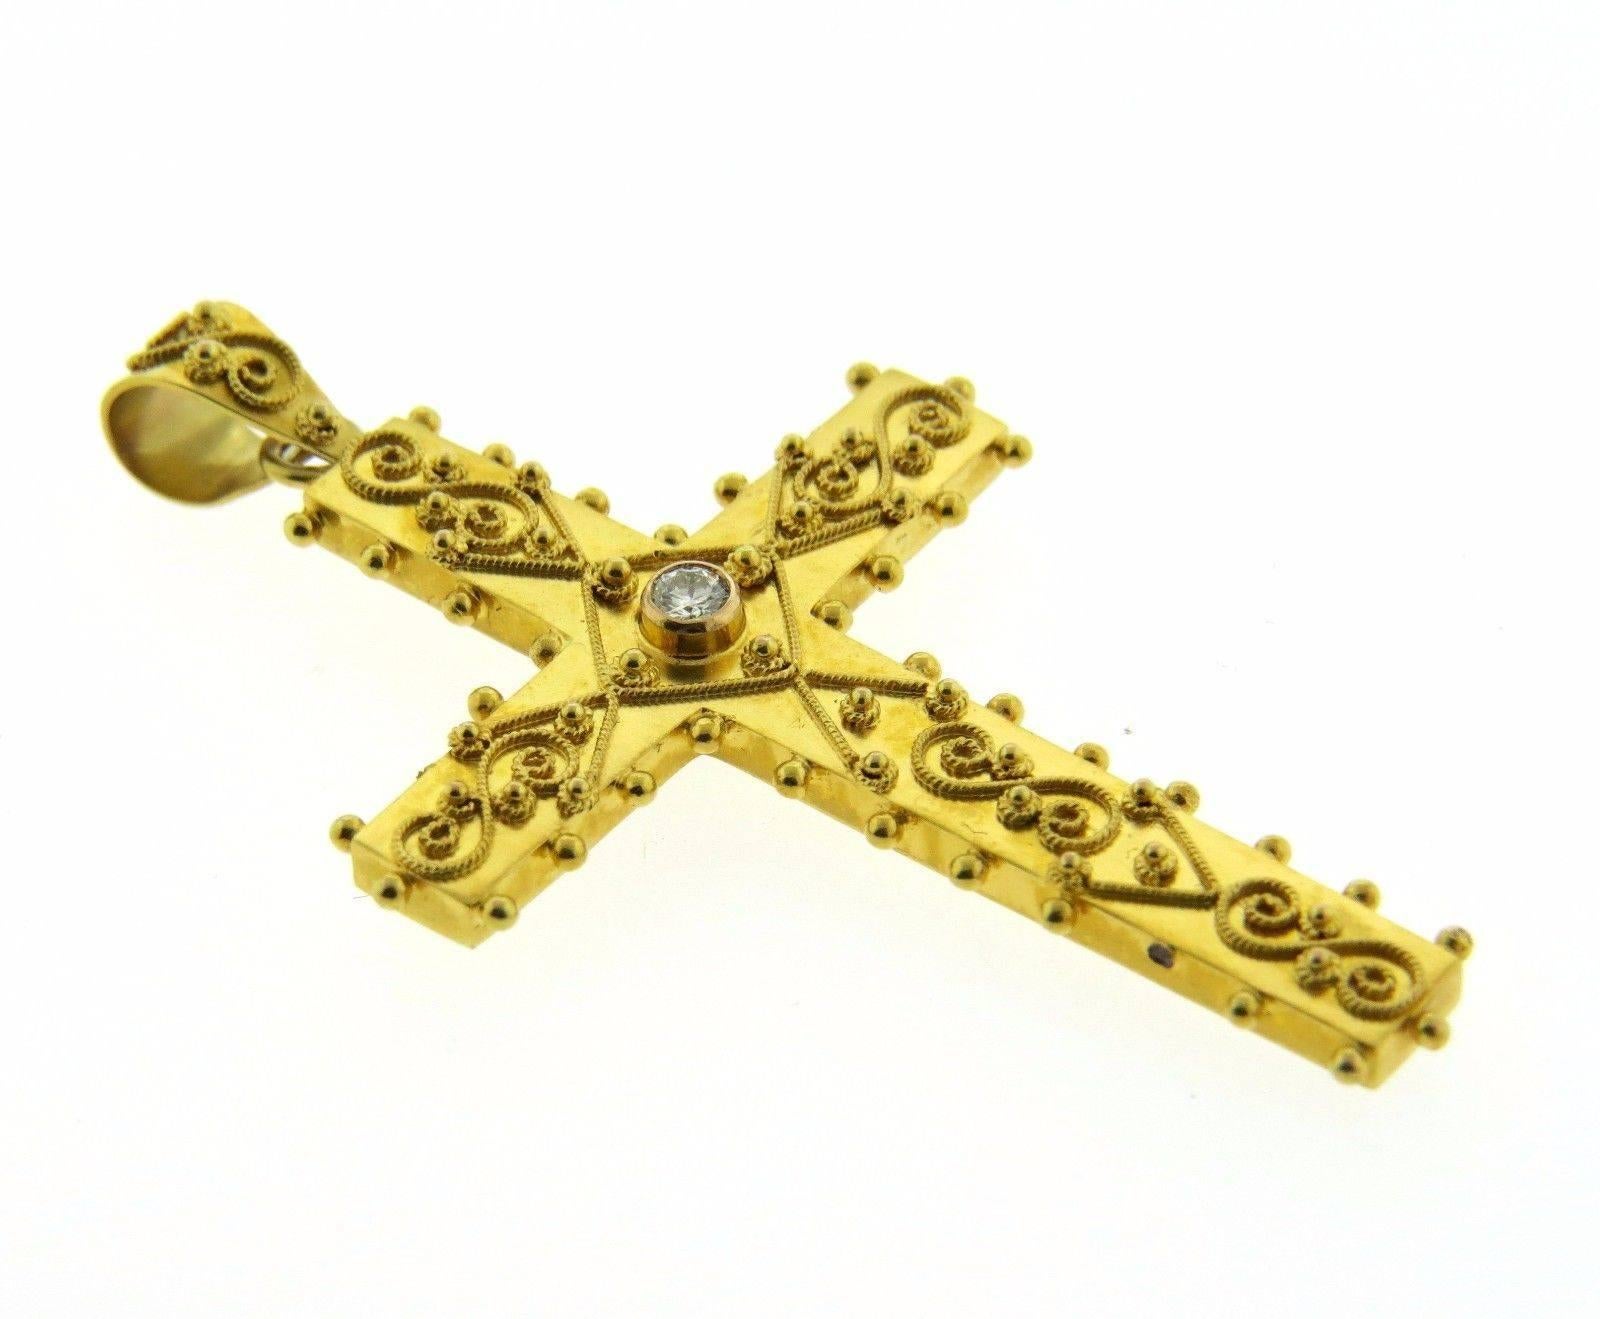 A 15k gold cross pendant set with a 0.06ct G/VS diamond.  The piece measures 55mm (including bale) x 33mm and wieghs 5.2 grams.